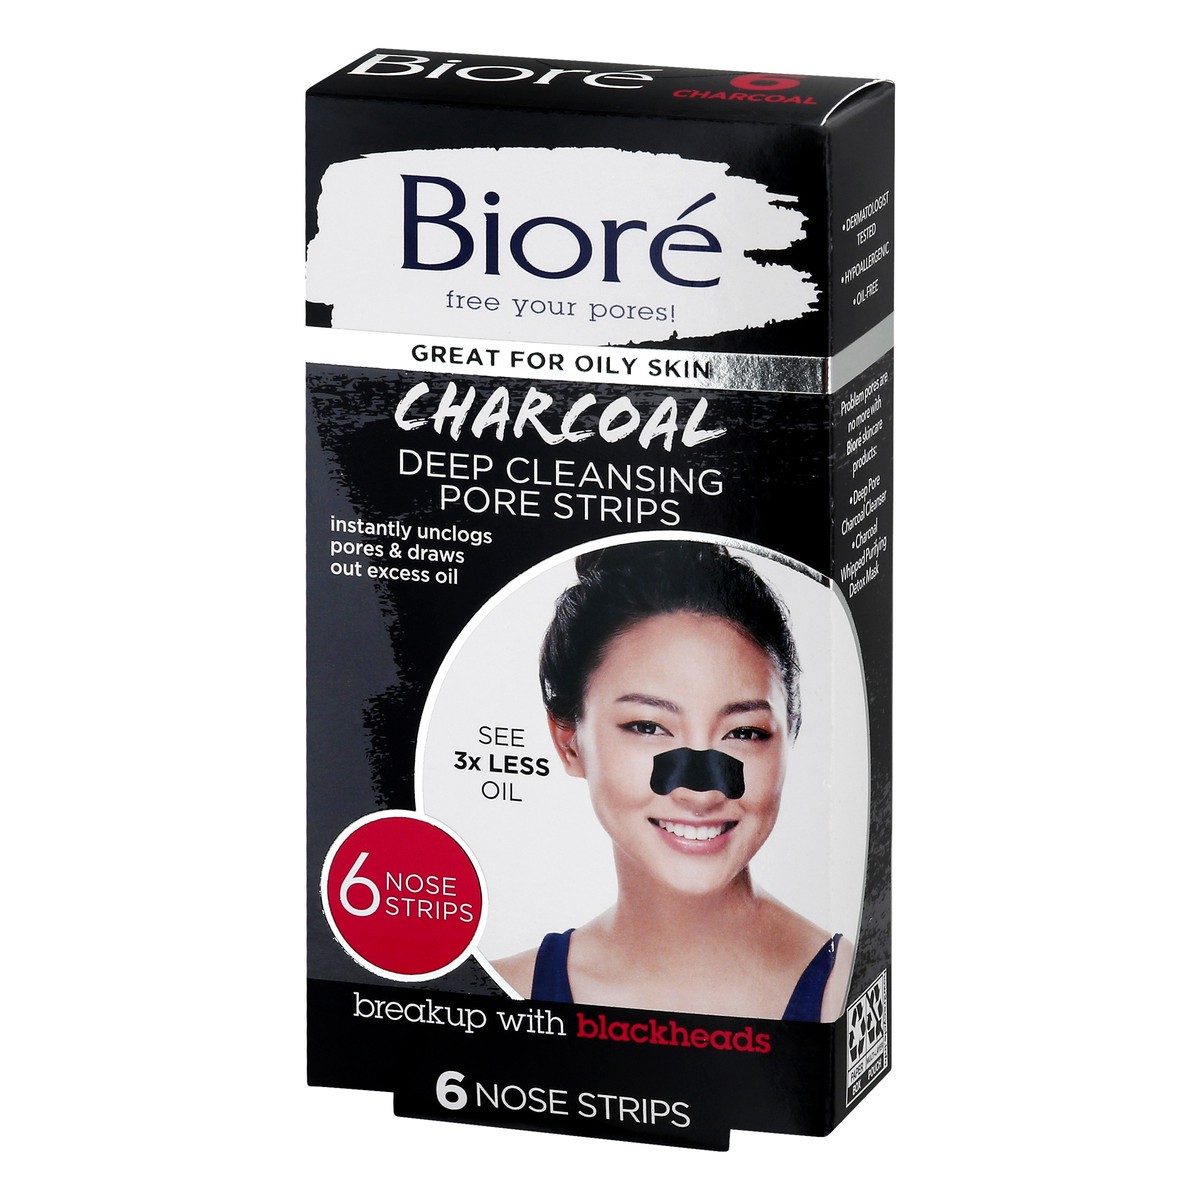 slide 4 of 12, Biore Charcoal, Deep Cleansing Pore Strips, Nose Strips for Blackhead Removal on Oily Skin, with Instant Pore Unclogging, 6 Count (Pack of 1), 6 ct